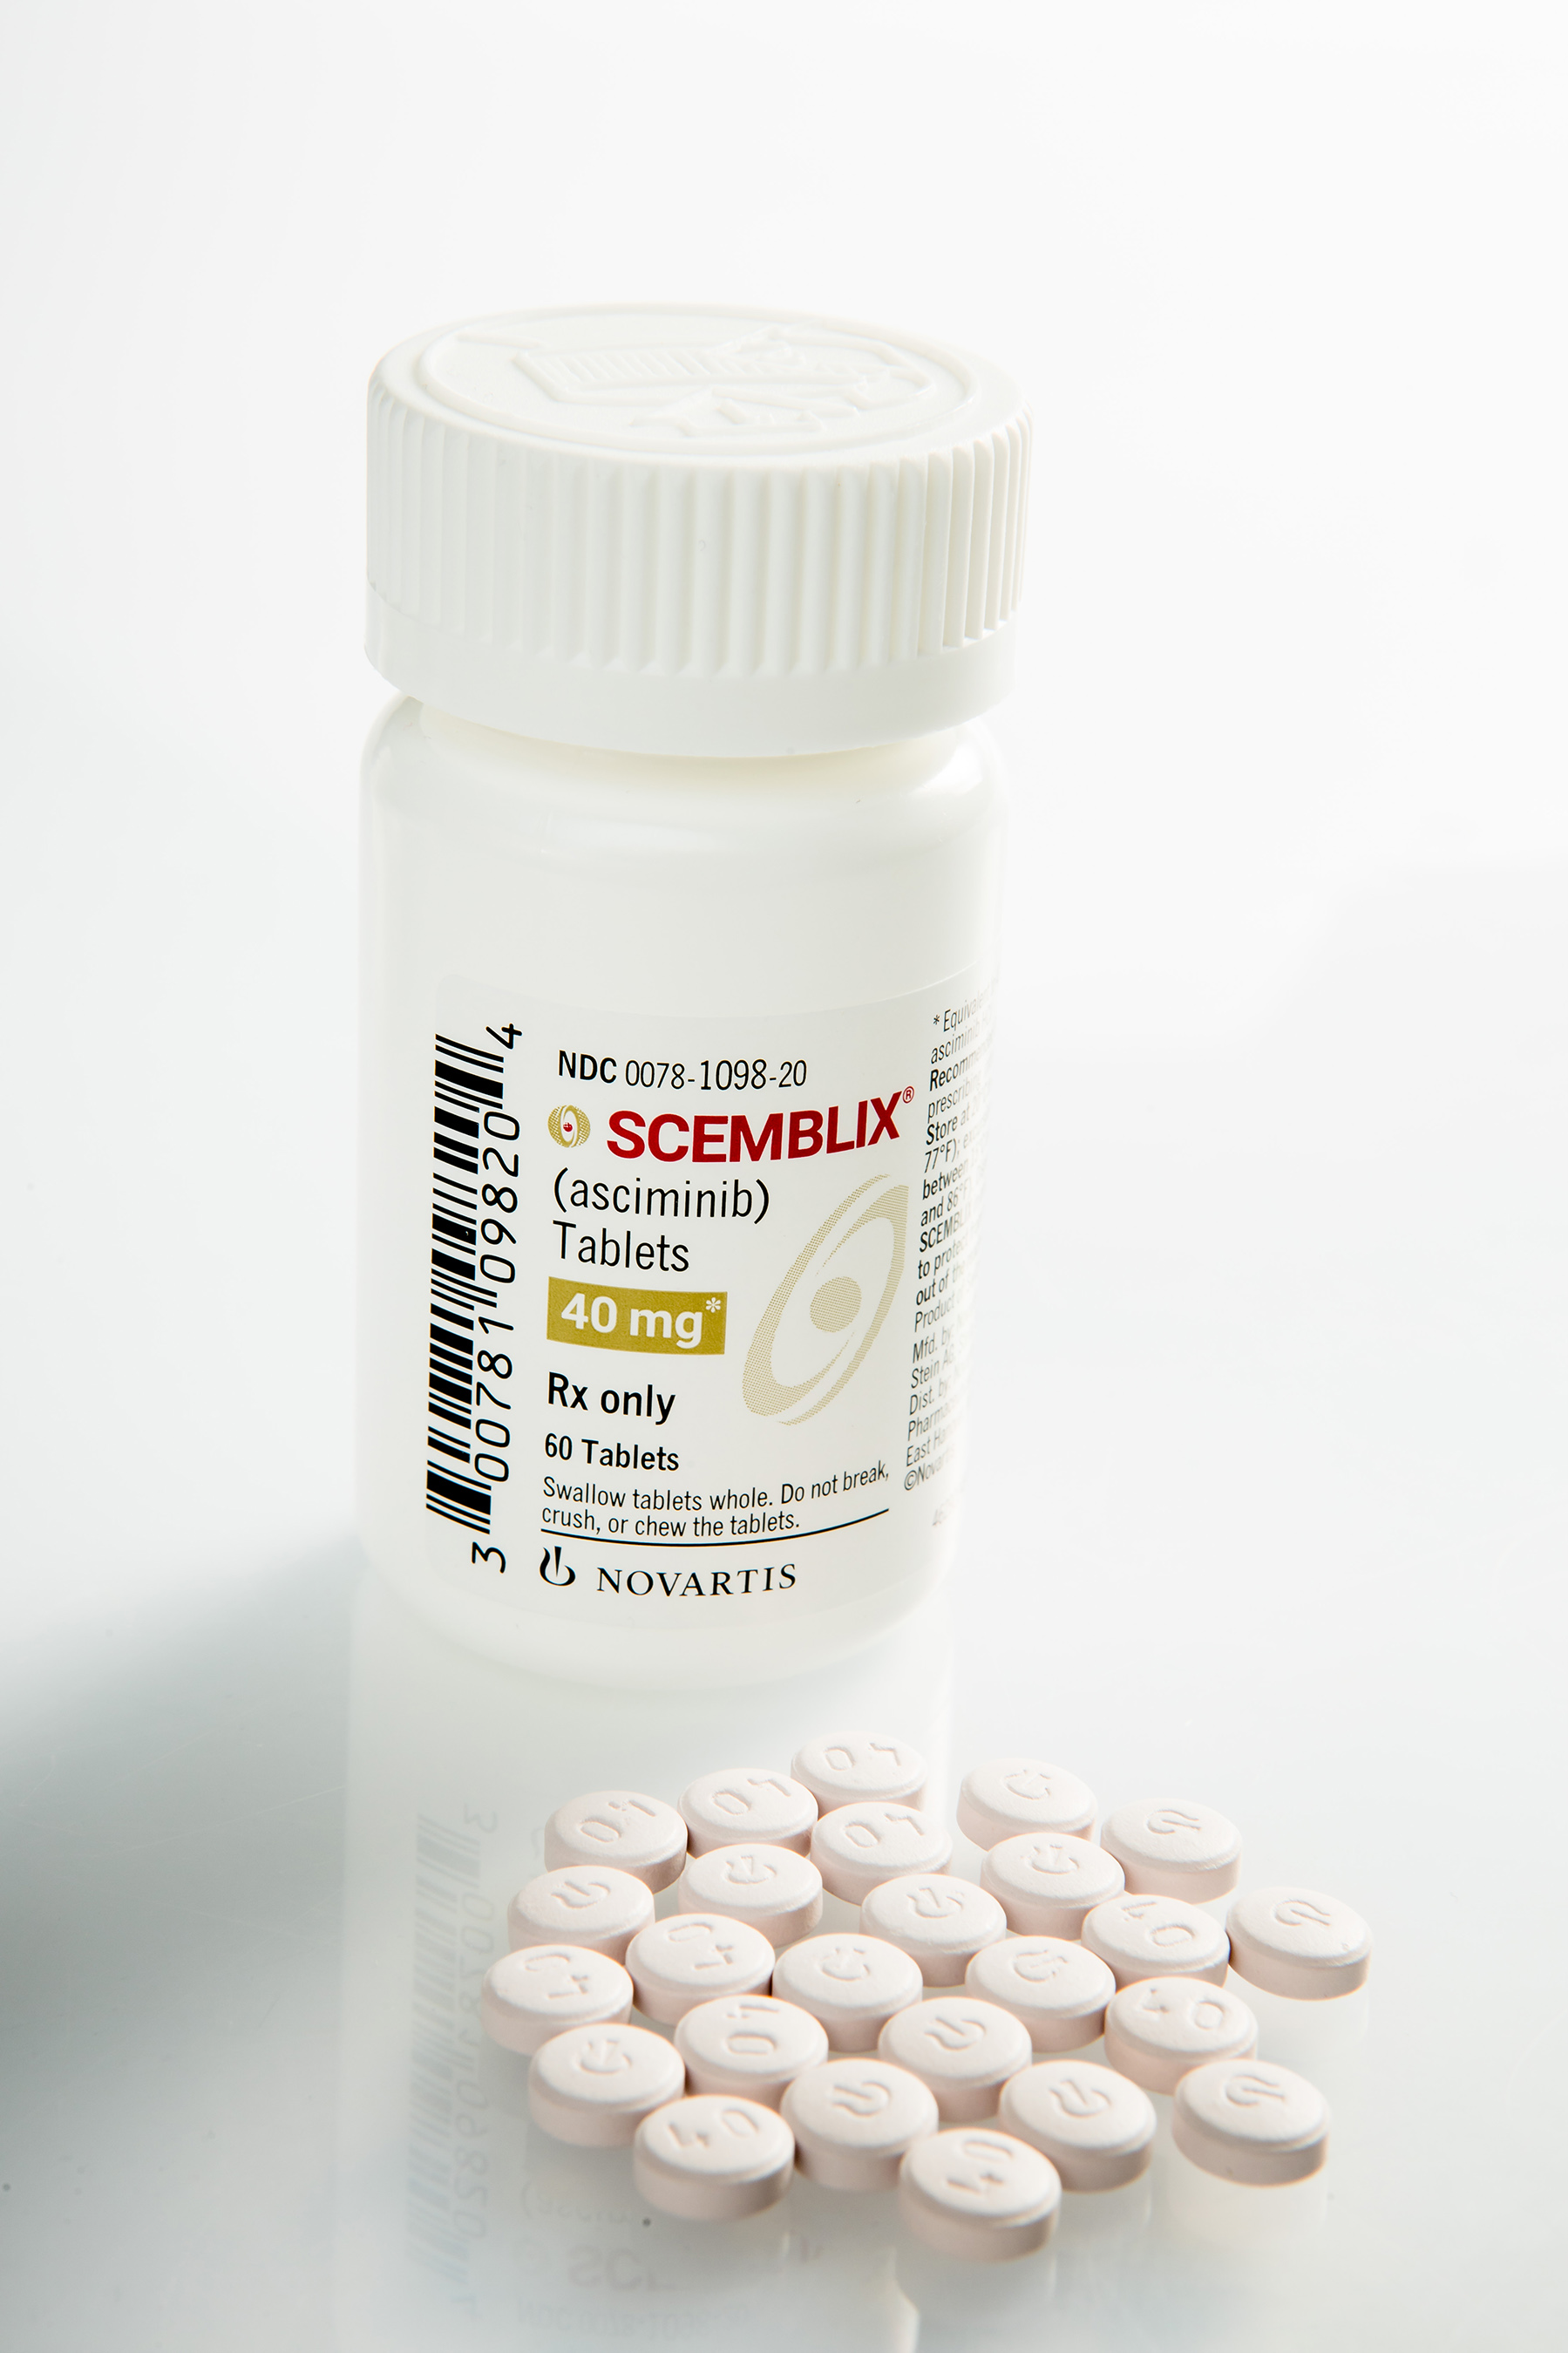 Scemblix product and packaging